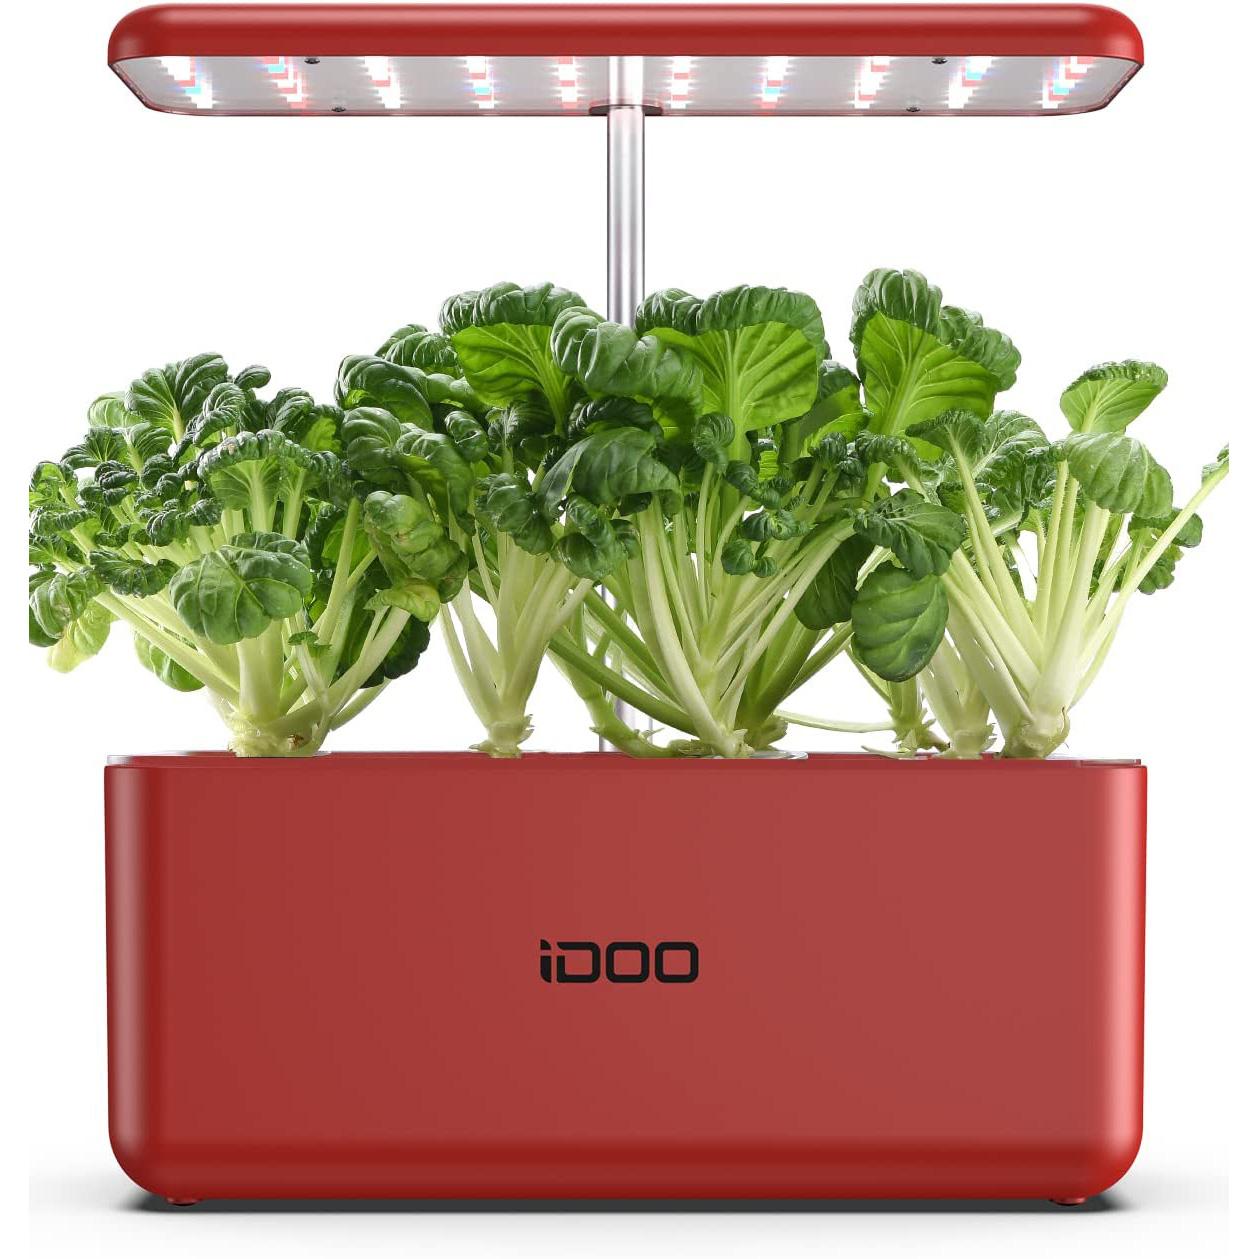 iDOO Hydroponic Indoor Herb Garden System for $34.99 Shipped